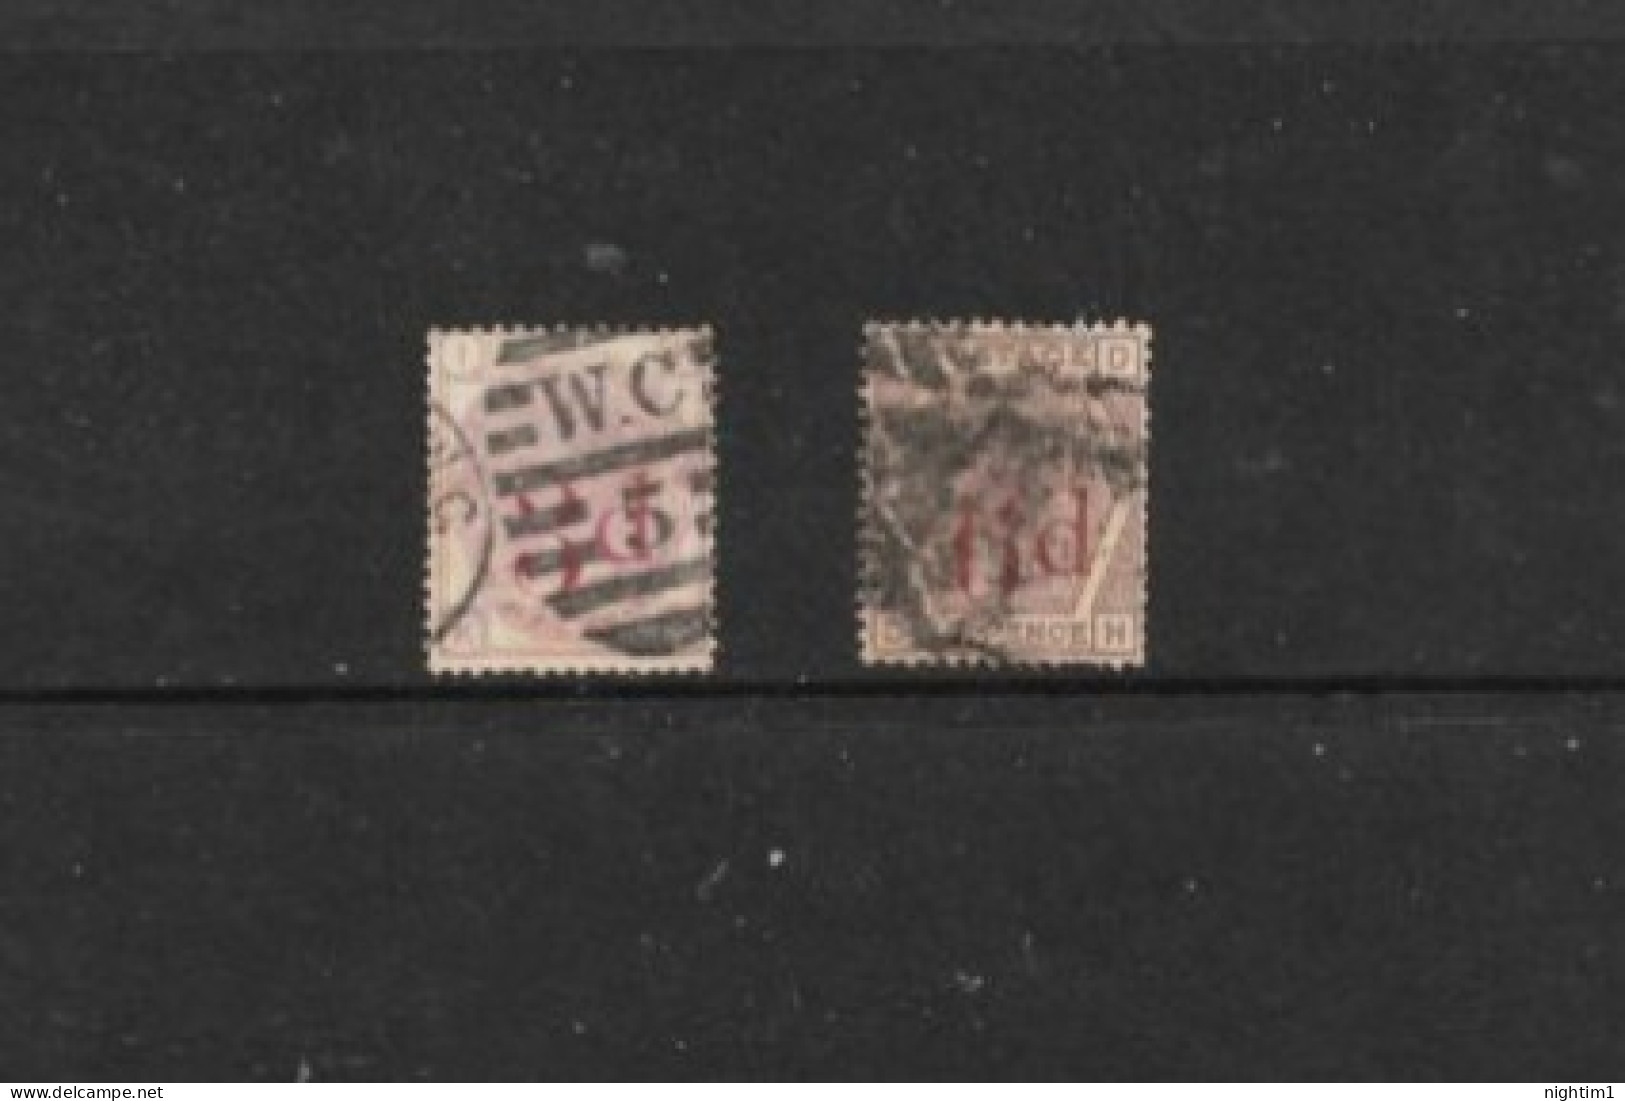 GREAT BRITAIN COLLECTION.  3d ON 3d AND 6d ON 6d. TWO STAMPS. - Usati